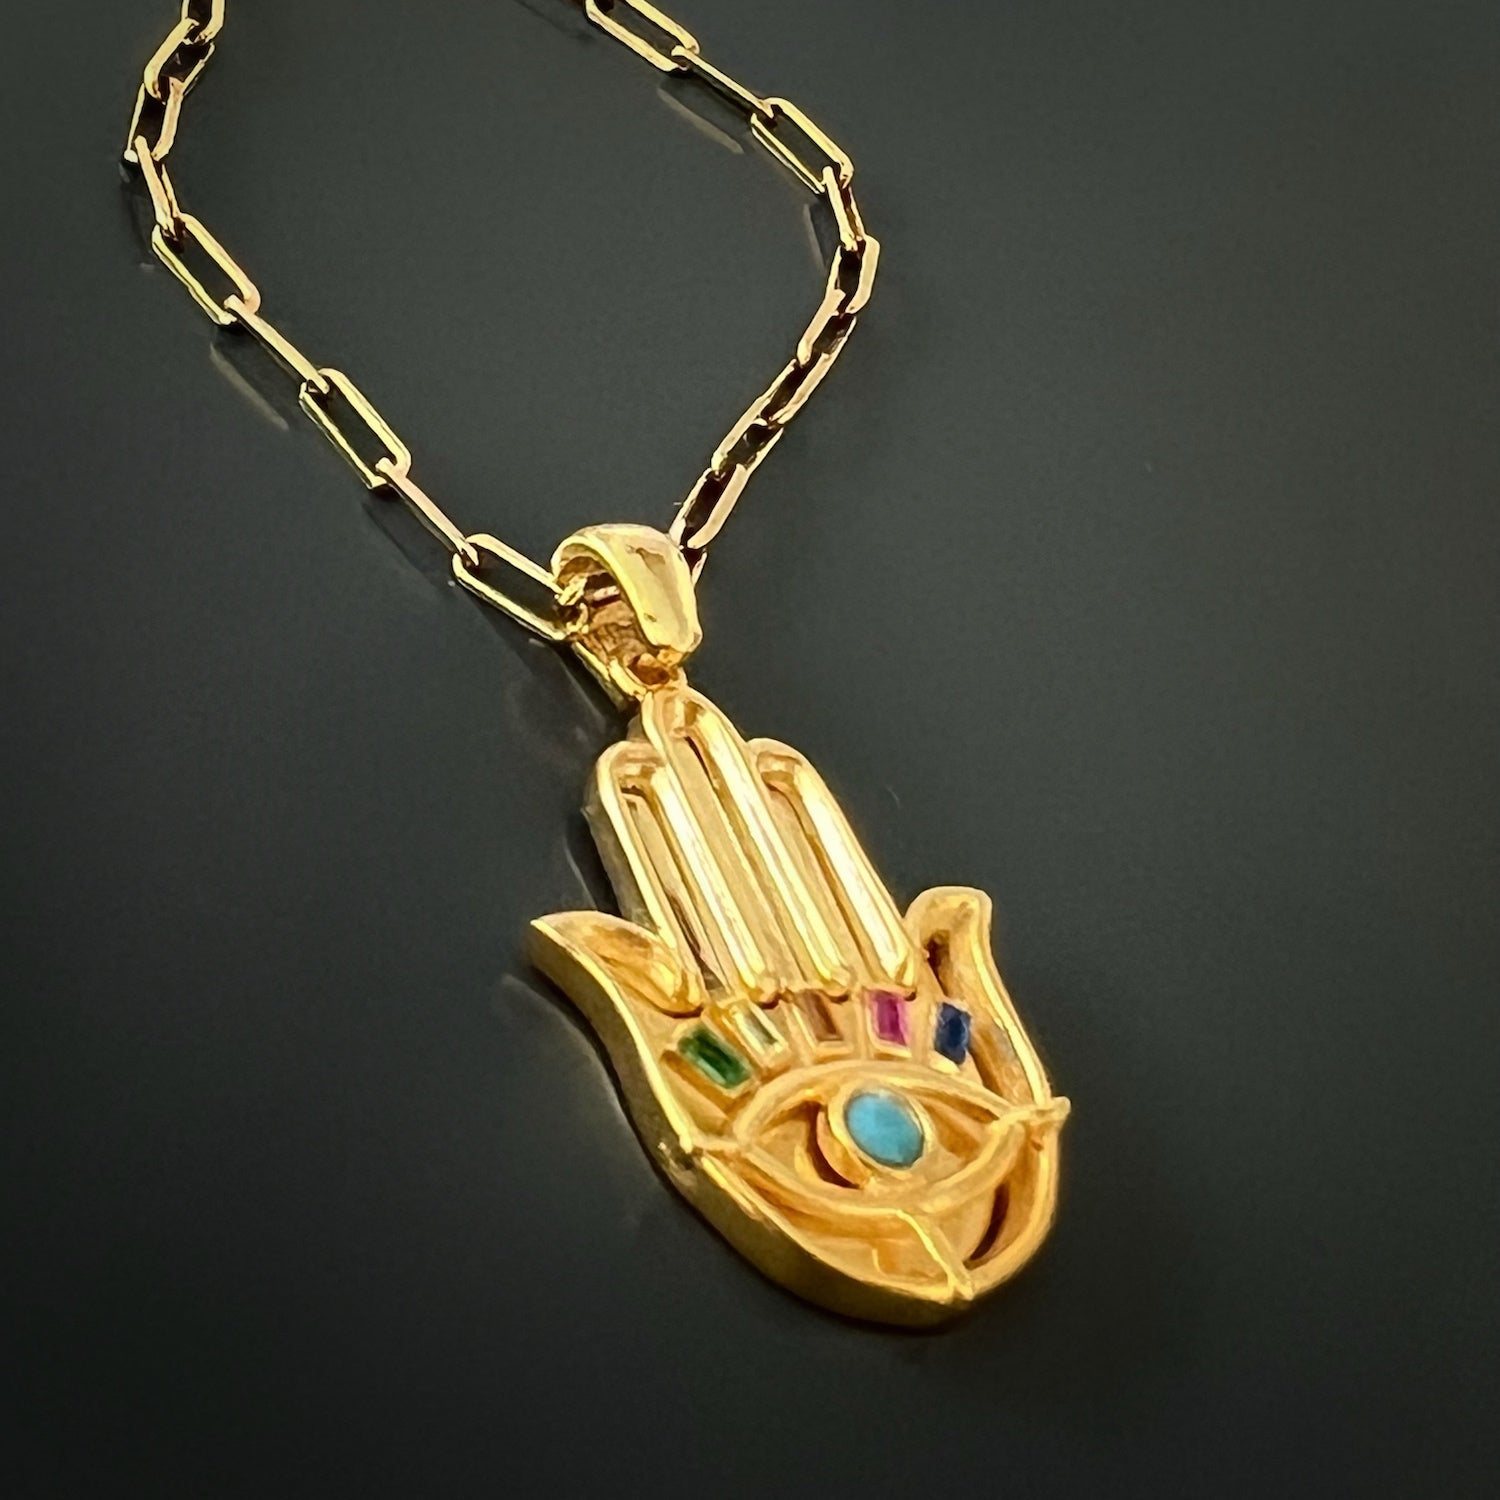 Turquoise Hamsa Necklace - This beautiful necklace showcases a gold-plated Hamsa pendant with a calming turquoise stone, symbolizing protection and positive energy.